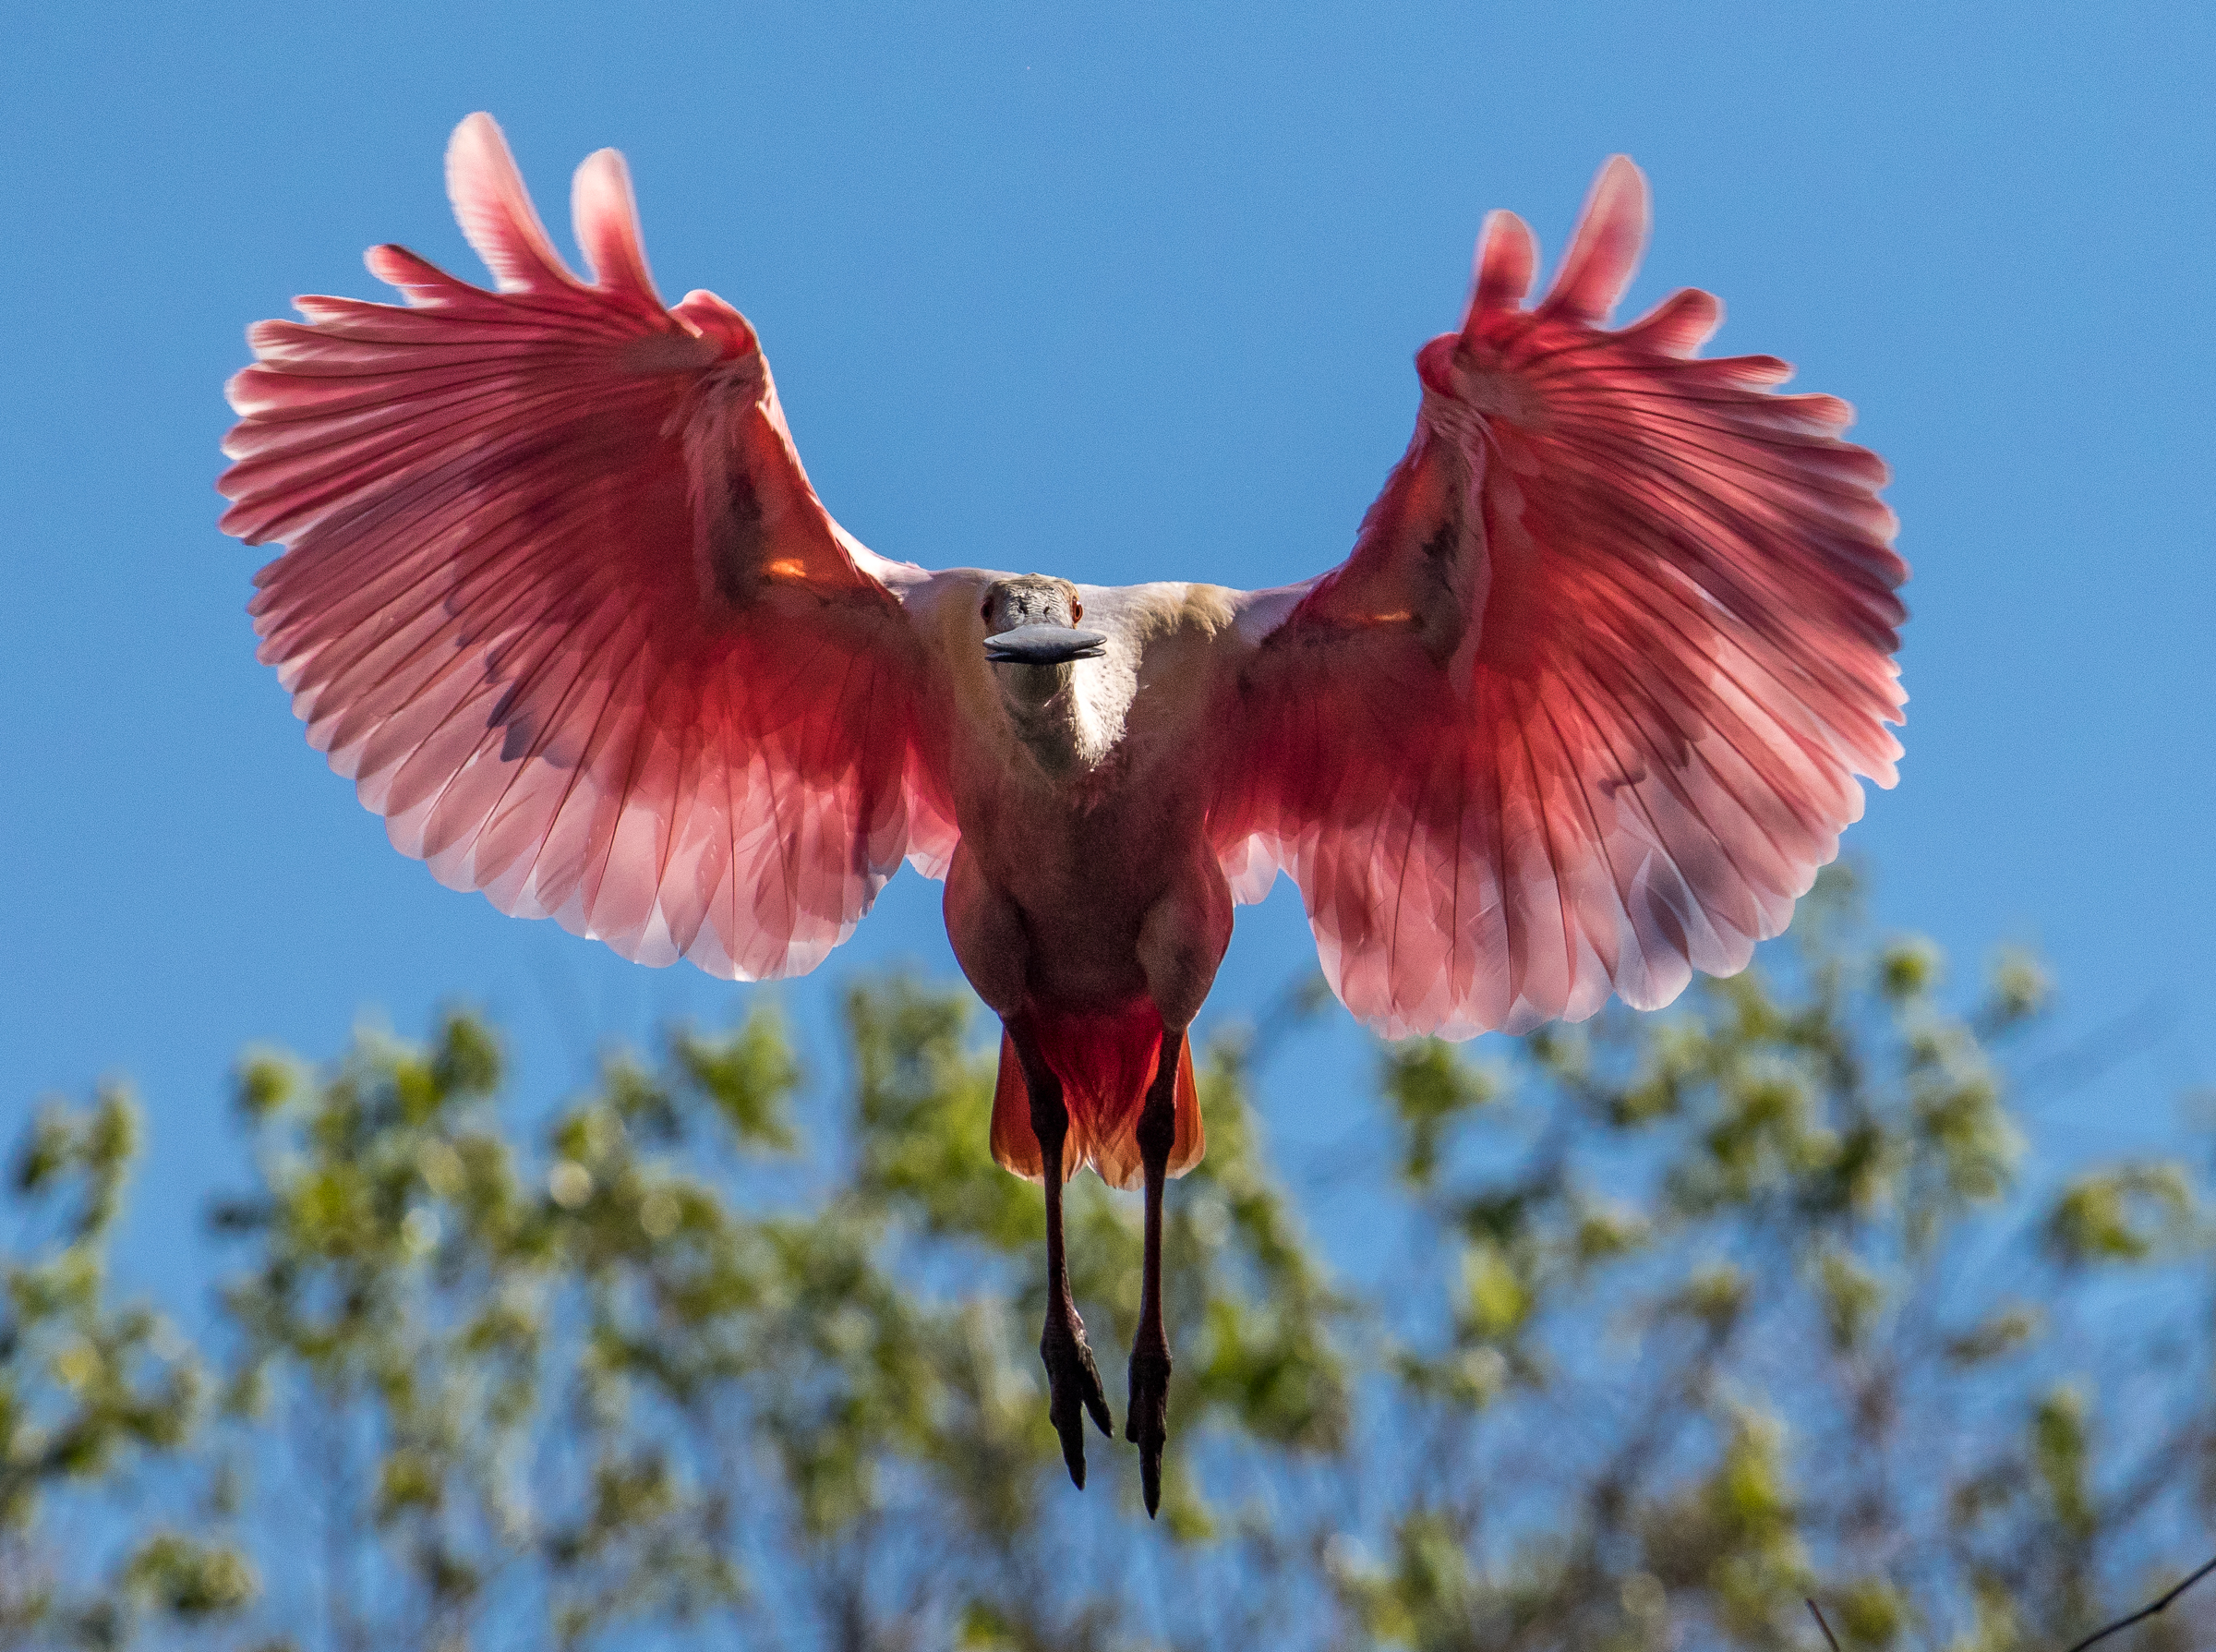 Roseate Spoonbill in flight against a sky and tree canopy background. Photo: George Cathcart/Audubon Photography Awards.